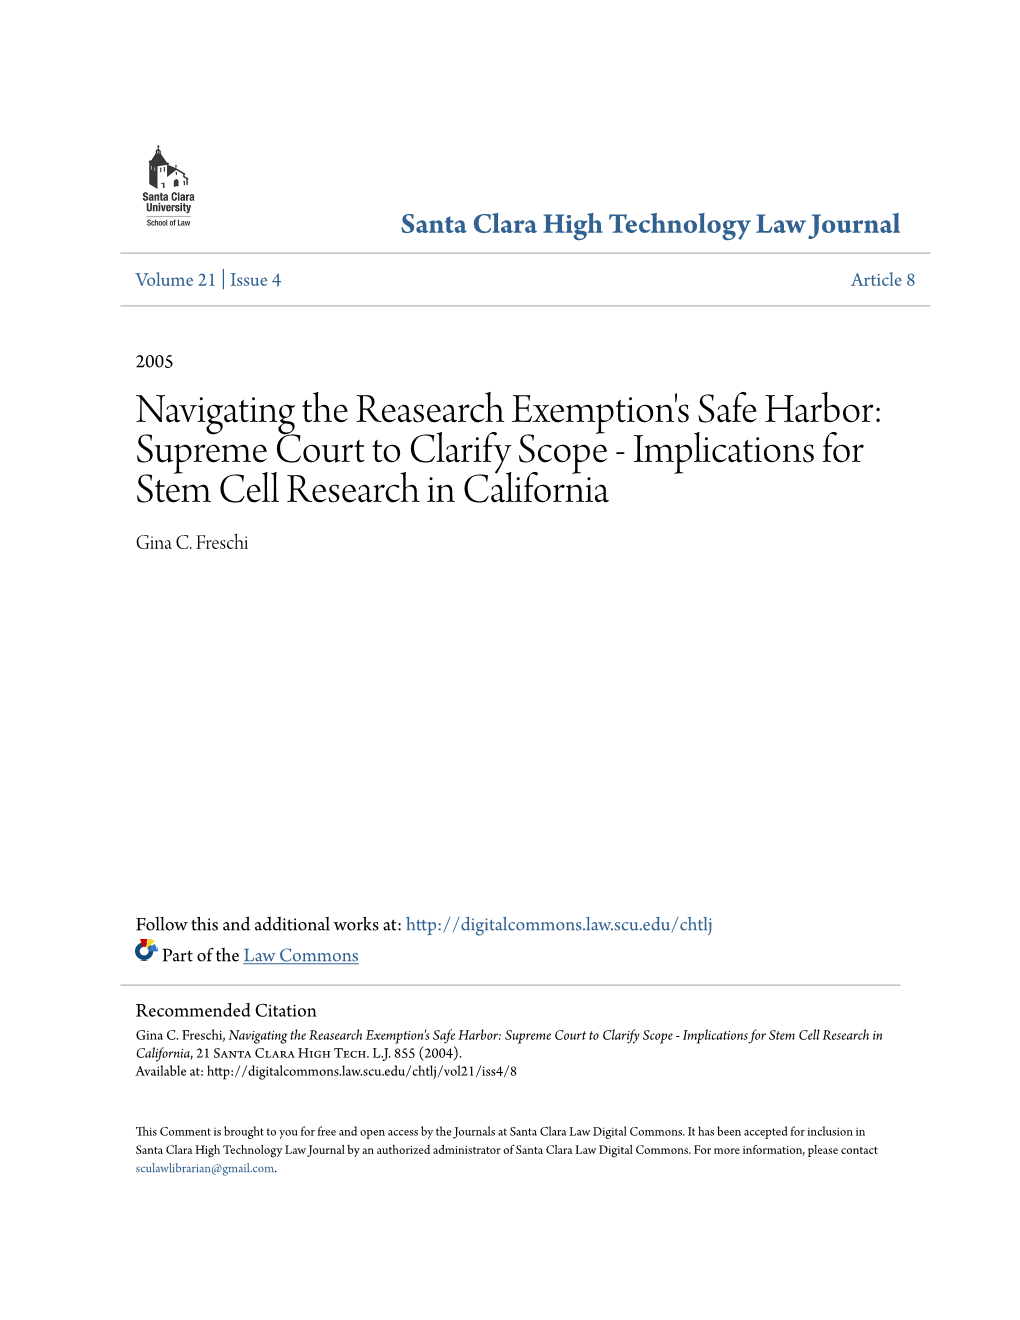 Supreme Court to Clarify Scope - Implications for Stem Cell Research in California Gina C